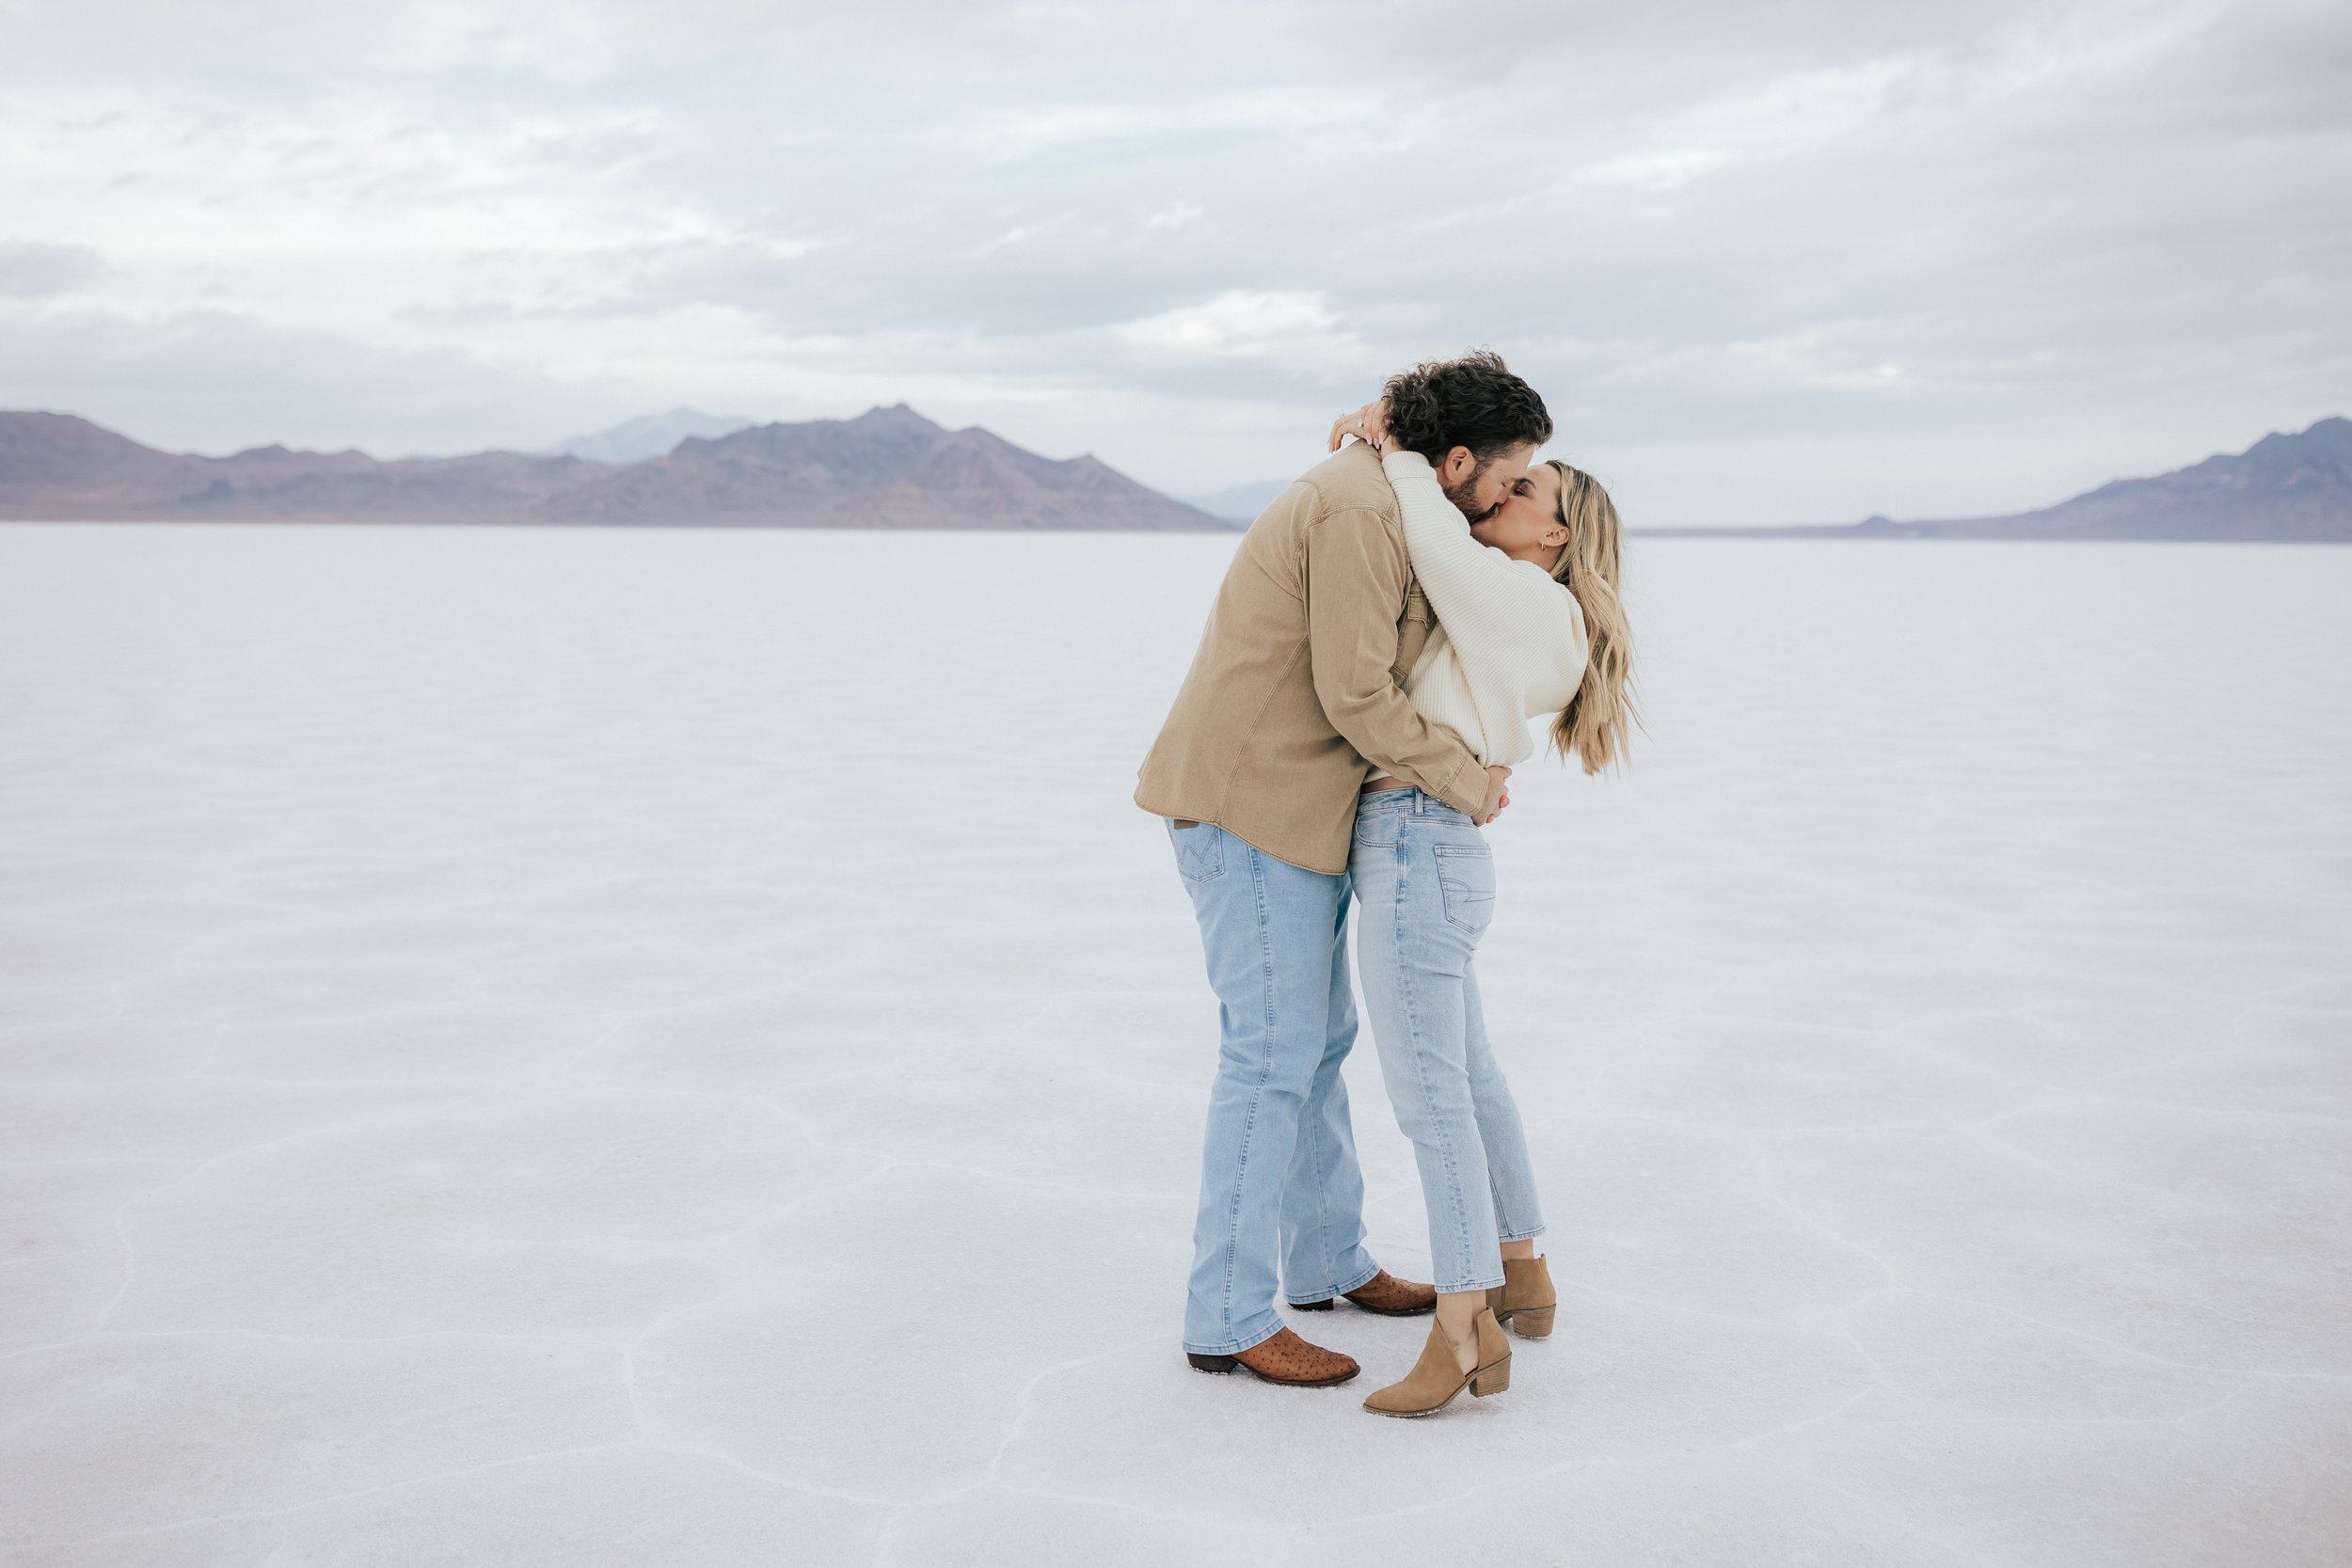  Photo of an engaged couple dancing as they kiss and hug at the Bonneville Salt Flats near Wendover, Nevada and Salt Lake City, Utah. Cowboy and his girl walk together with his arm around her shoulder. The Salt Flats are white and the sky is overcast